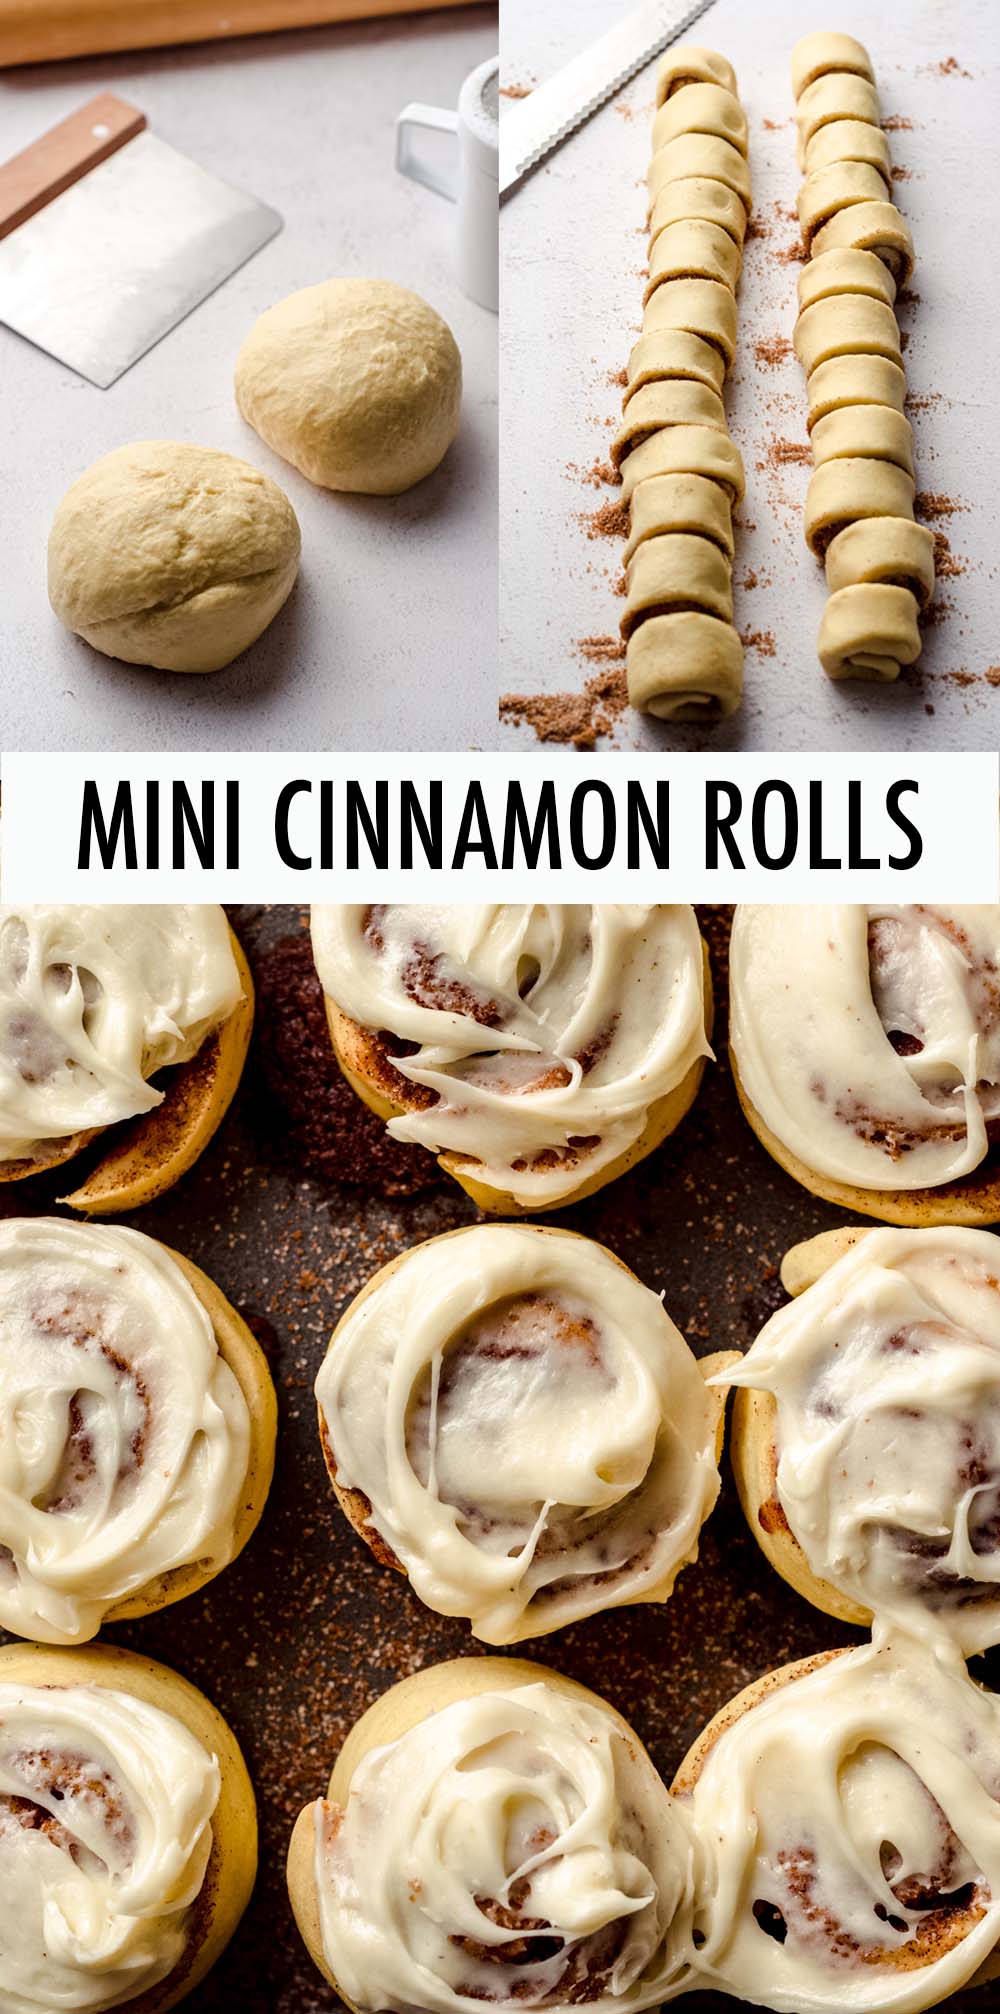 My very favorite and easy recipe for soft and fluffy cinnamon rolls adjusted to yield 24 mini cinnamon rolls! These rolls are filled with a buttery cinnamon filling and topped with a smooth cream cheese frosting. This recipe only requires one rise and it can be made ahead of time to bake later or the next day. via @frshaprilflours